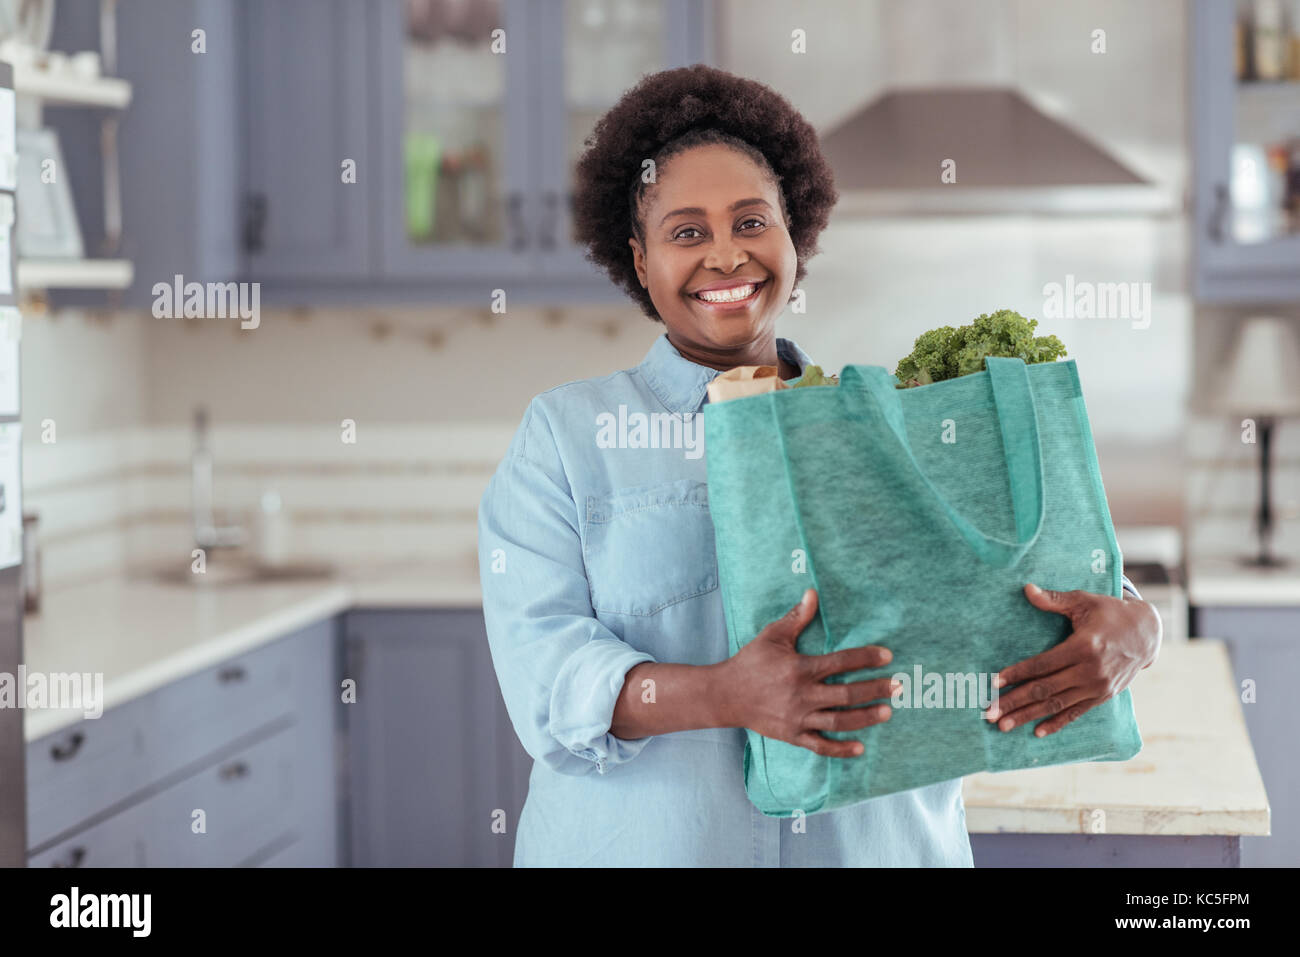 Smiling young African woman standing in her kitchen with groceries Stock Photo